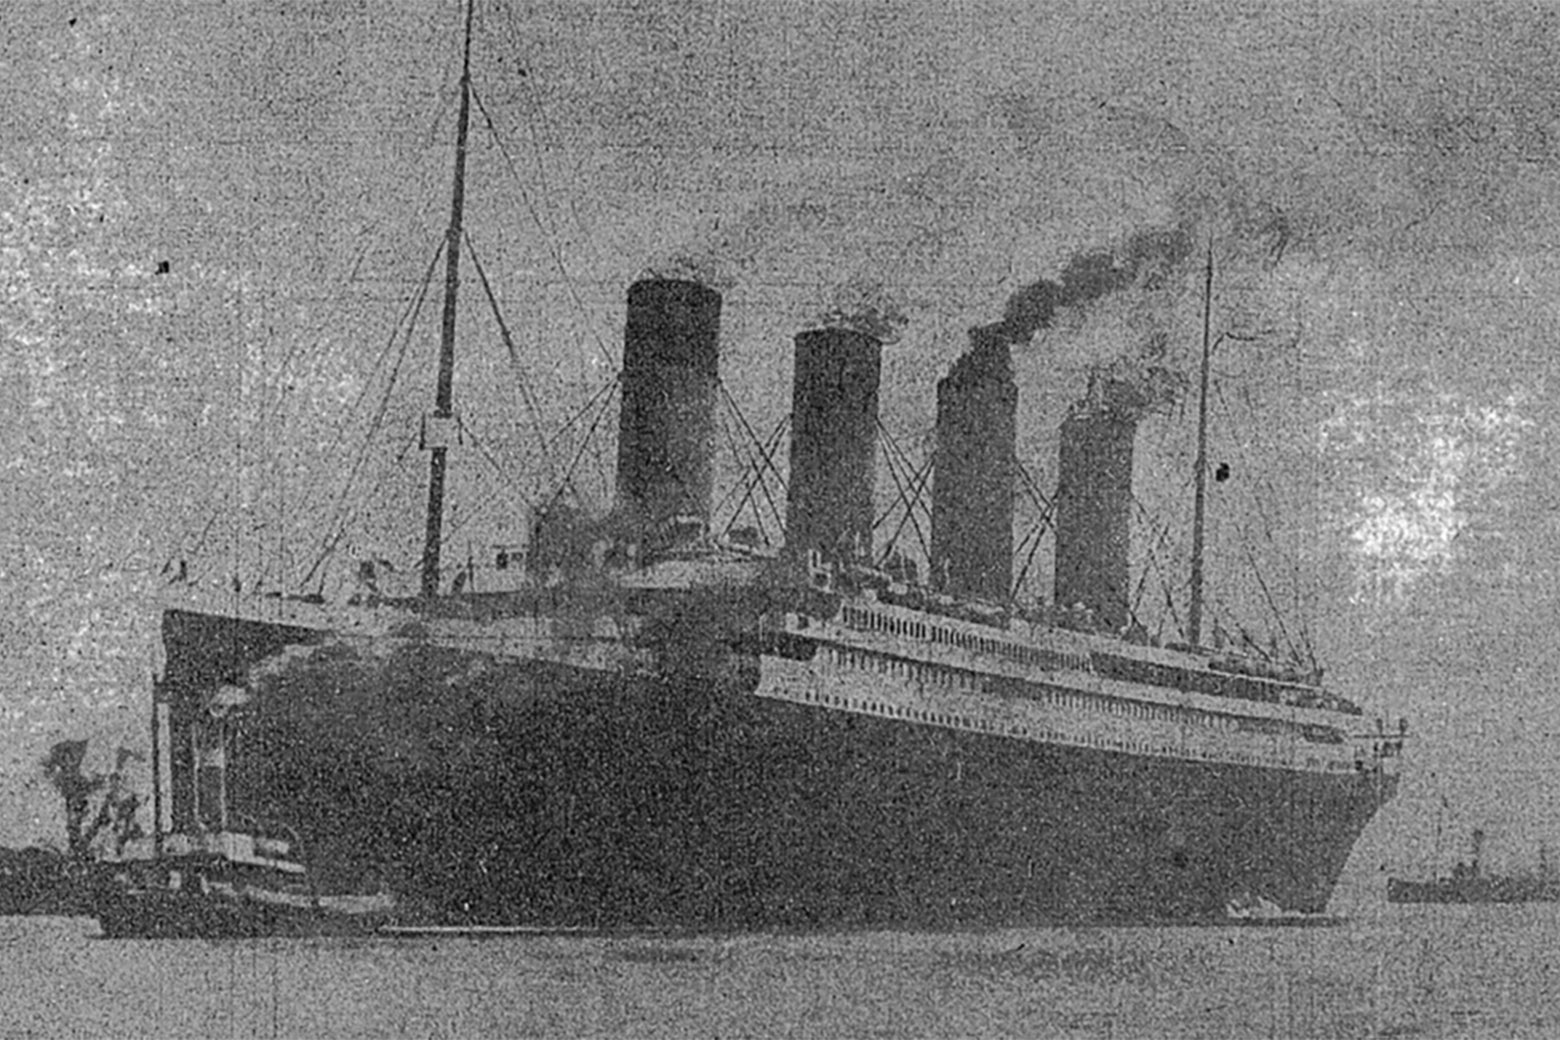 The lost Titanic being towed out of Belfast Harbor.